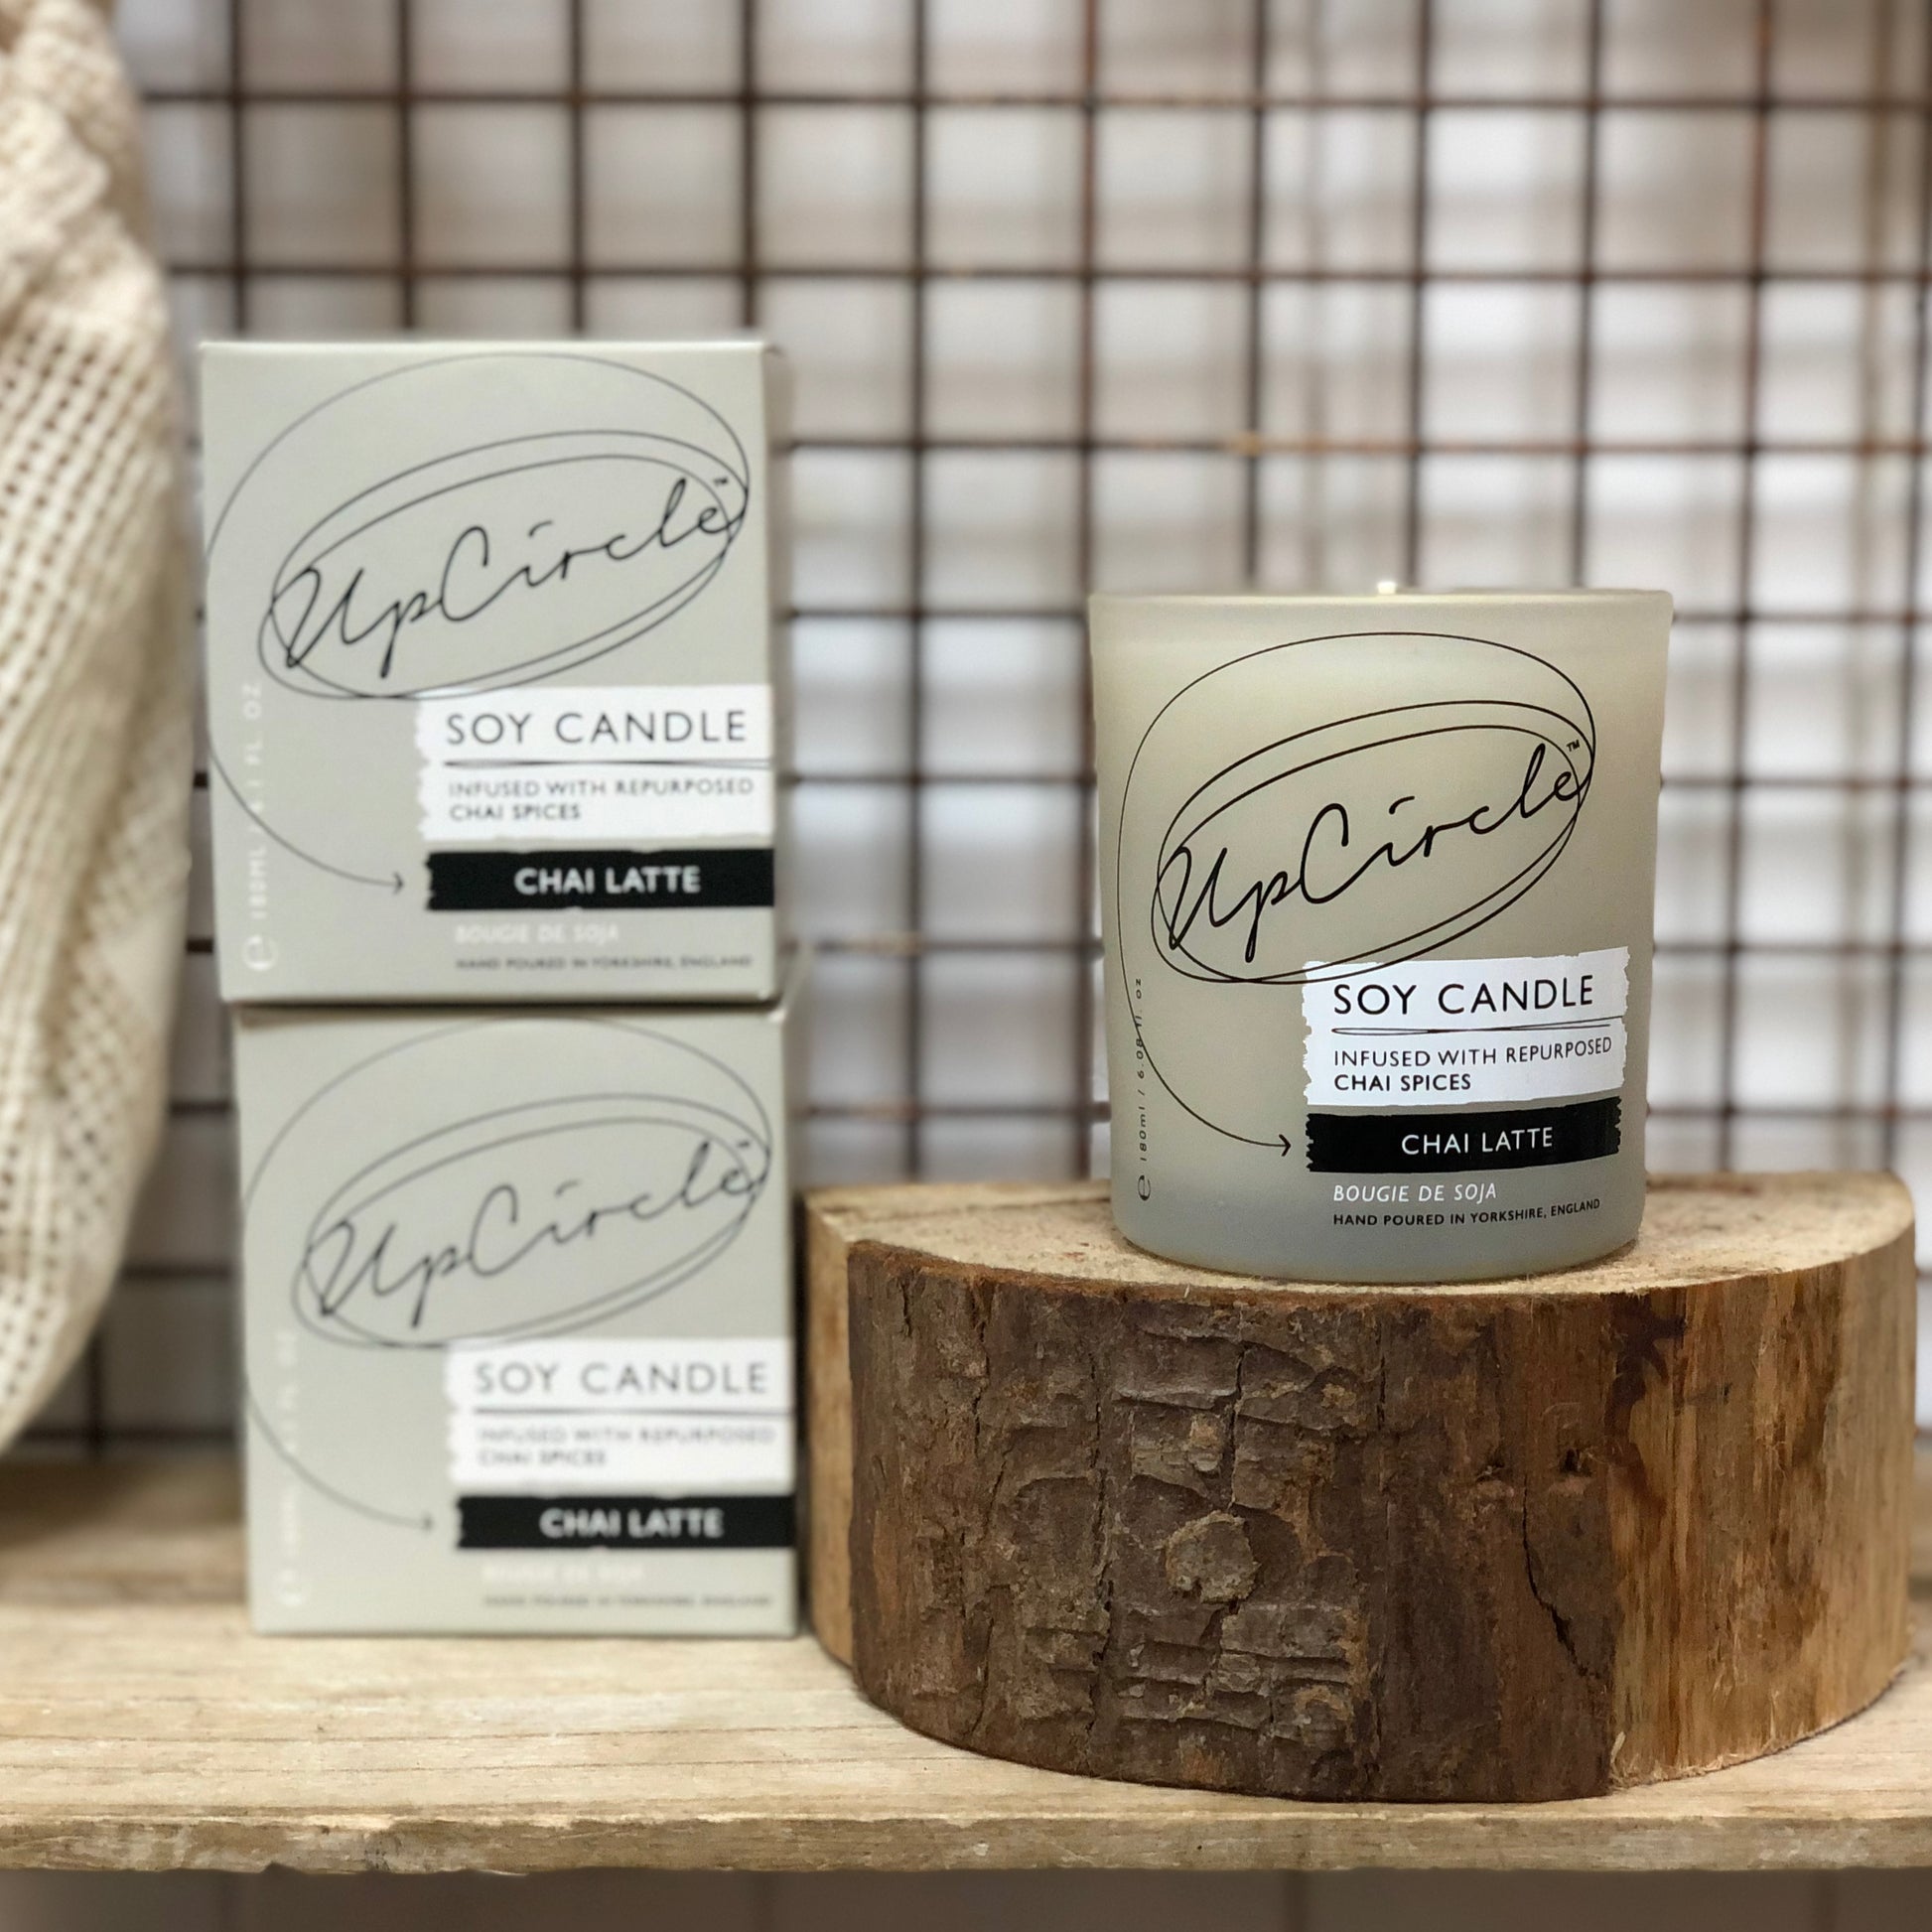 up circle soy candle on display in weigh and pay